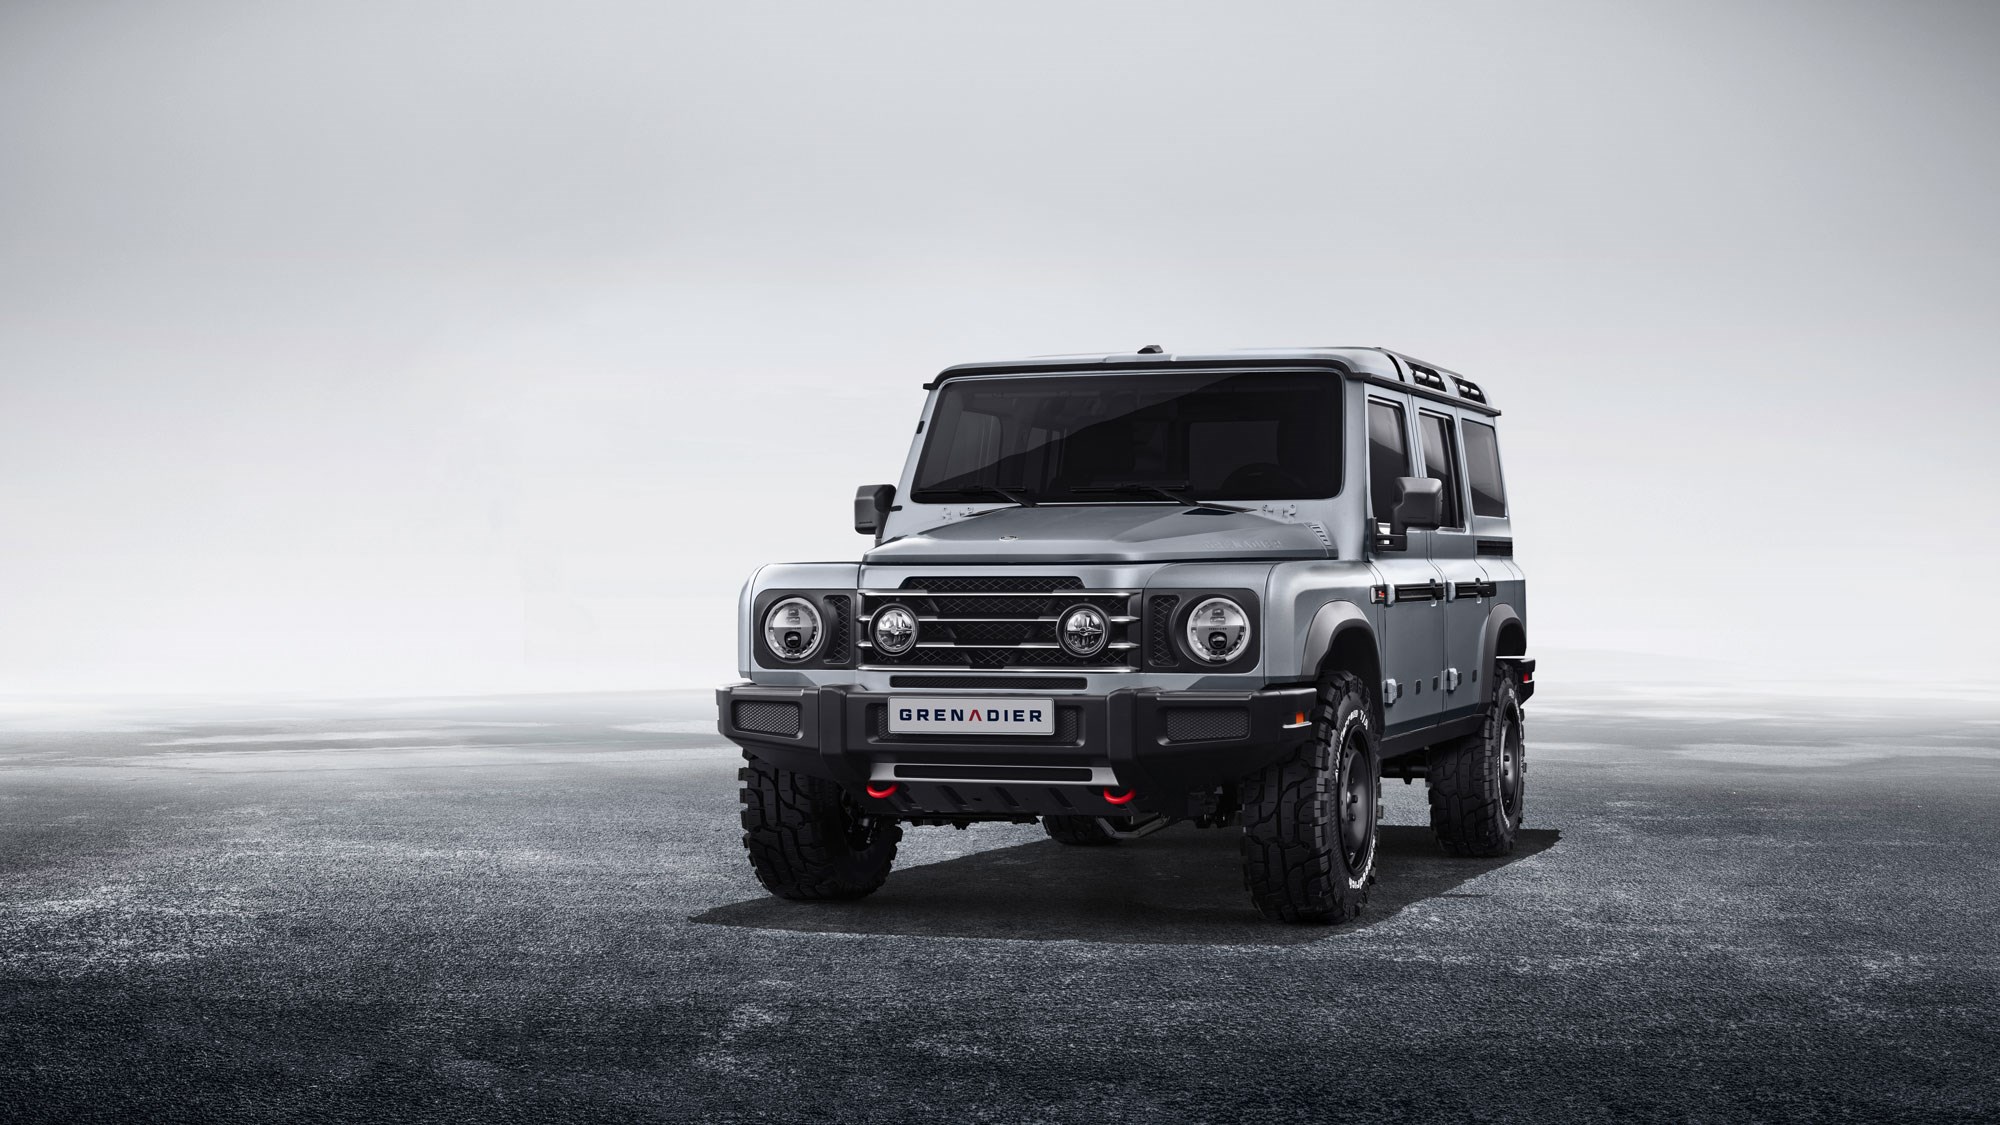 Luxury Ineos Grenadier 4X4 designed by Britain's richest man could